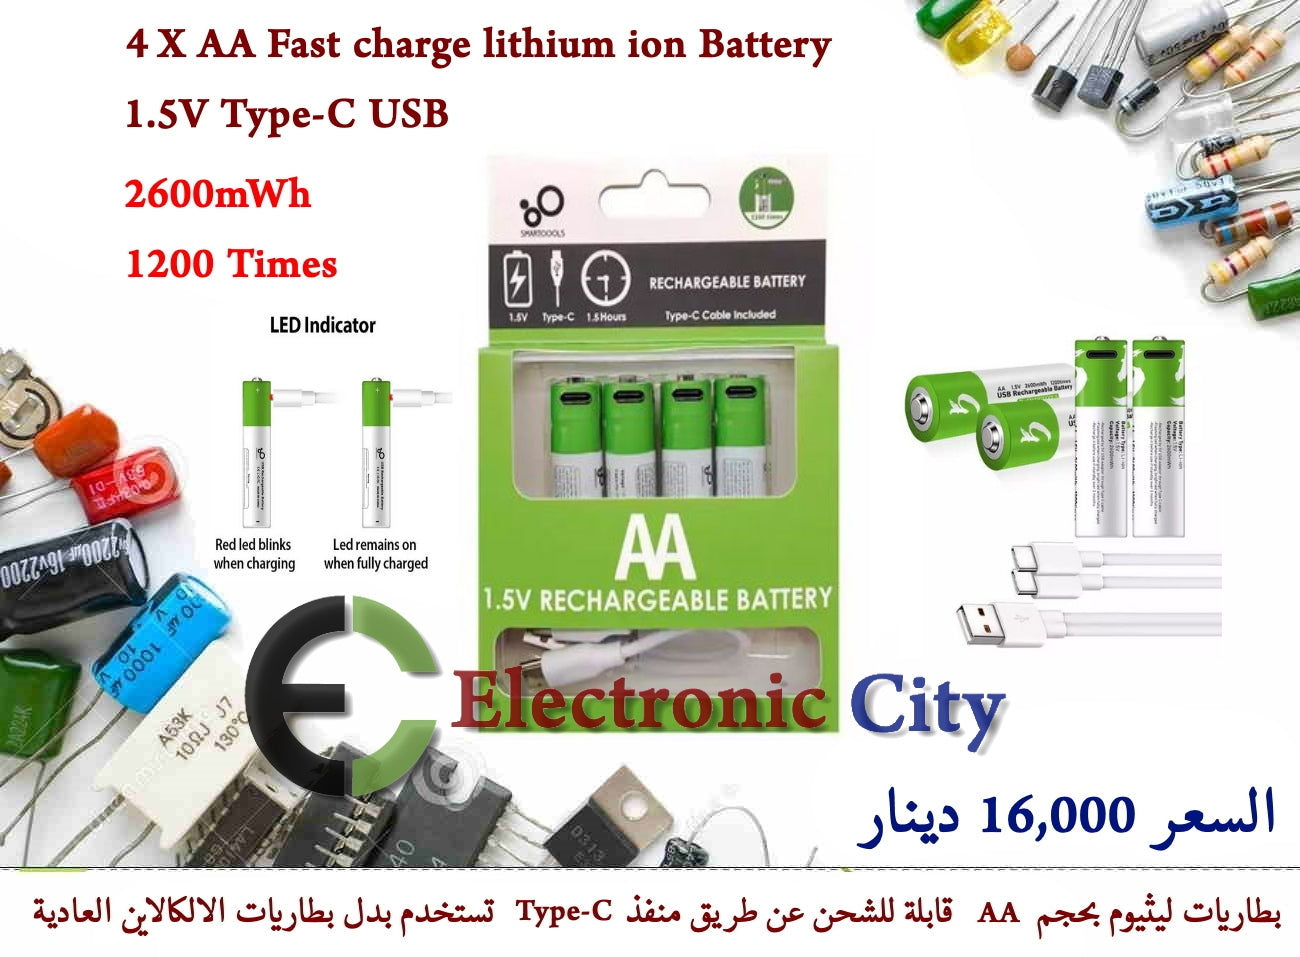 4X AA Fast charge lithium ion Battery 2600mWh 1.5V Type-C USB